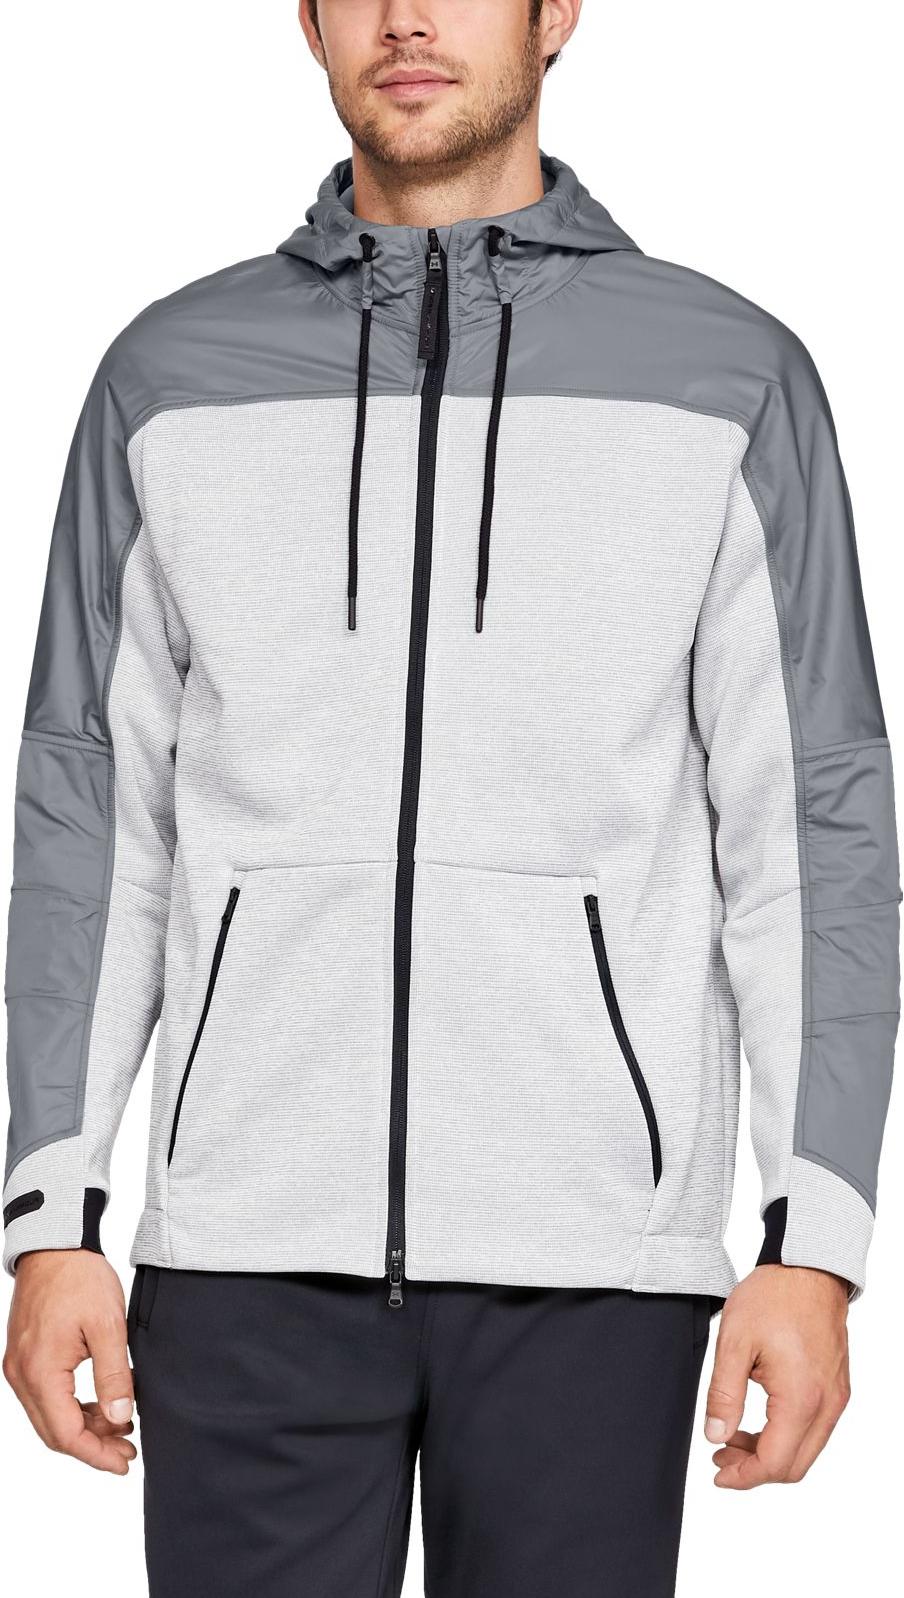 Jakna s kapuco Under Armour UNSTOPPABLE COLDGEAR SWACKET